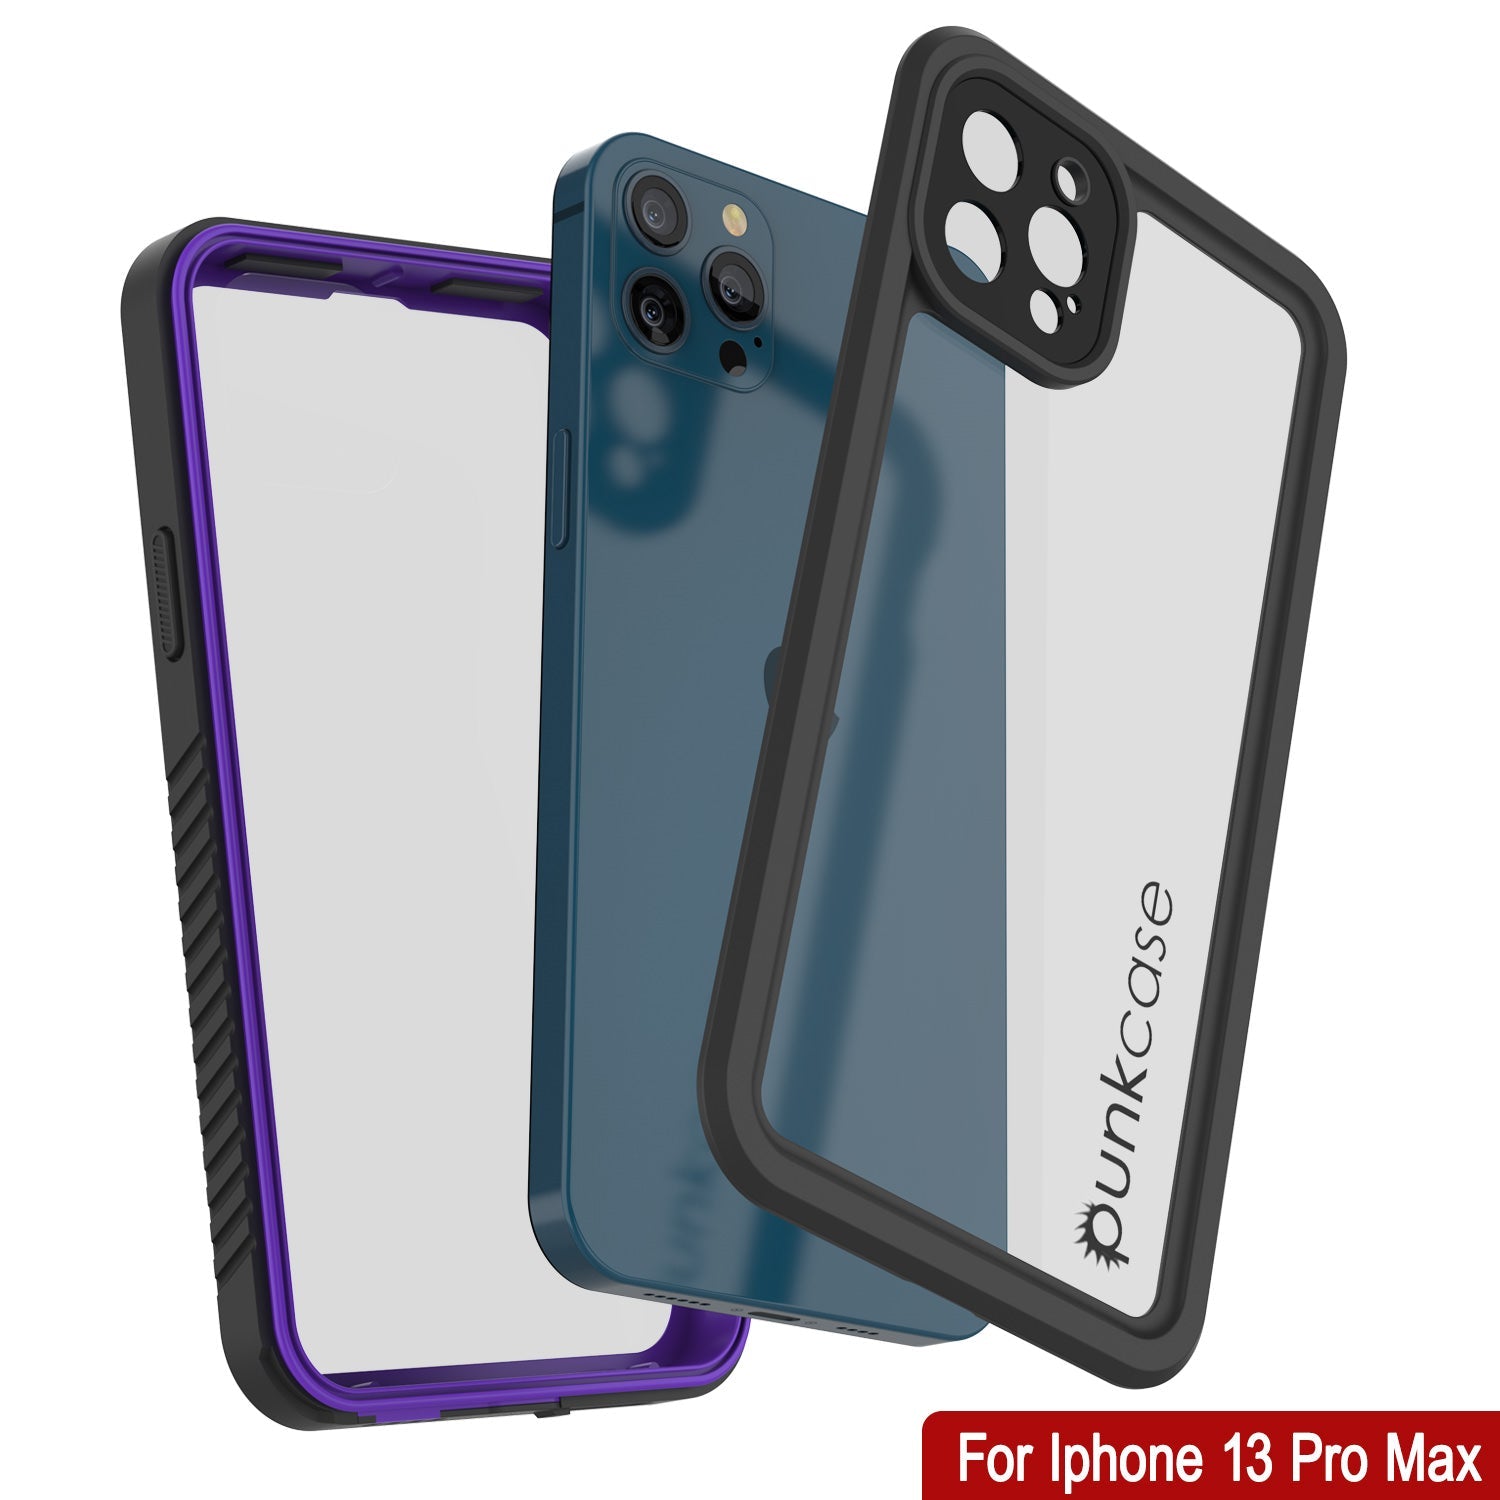 iPhone 13 Pro Max  Waterproof Case, Punkcase [Extreme Series] Armor Cover W/ Built In Screen Protector [Purple]